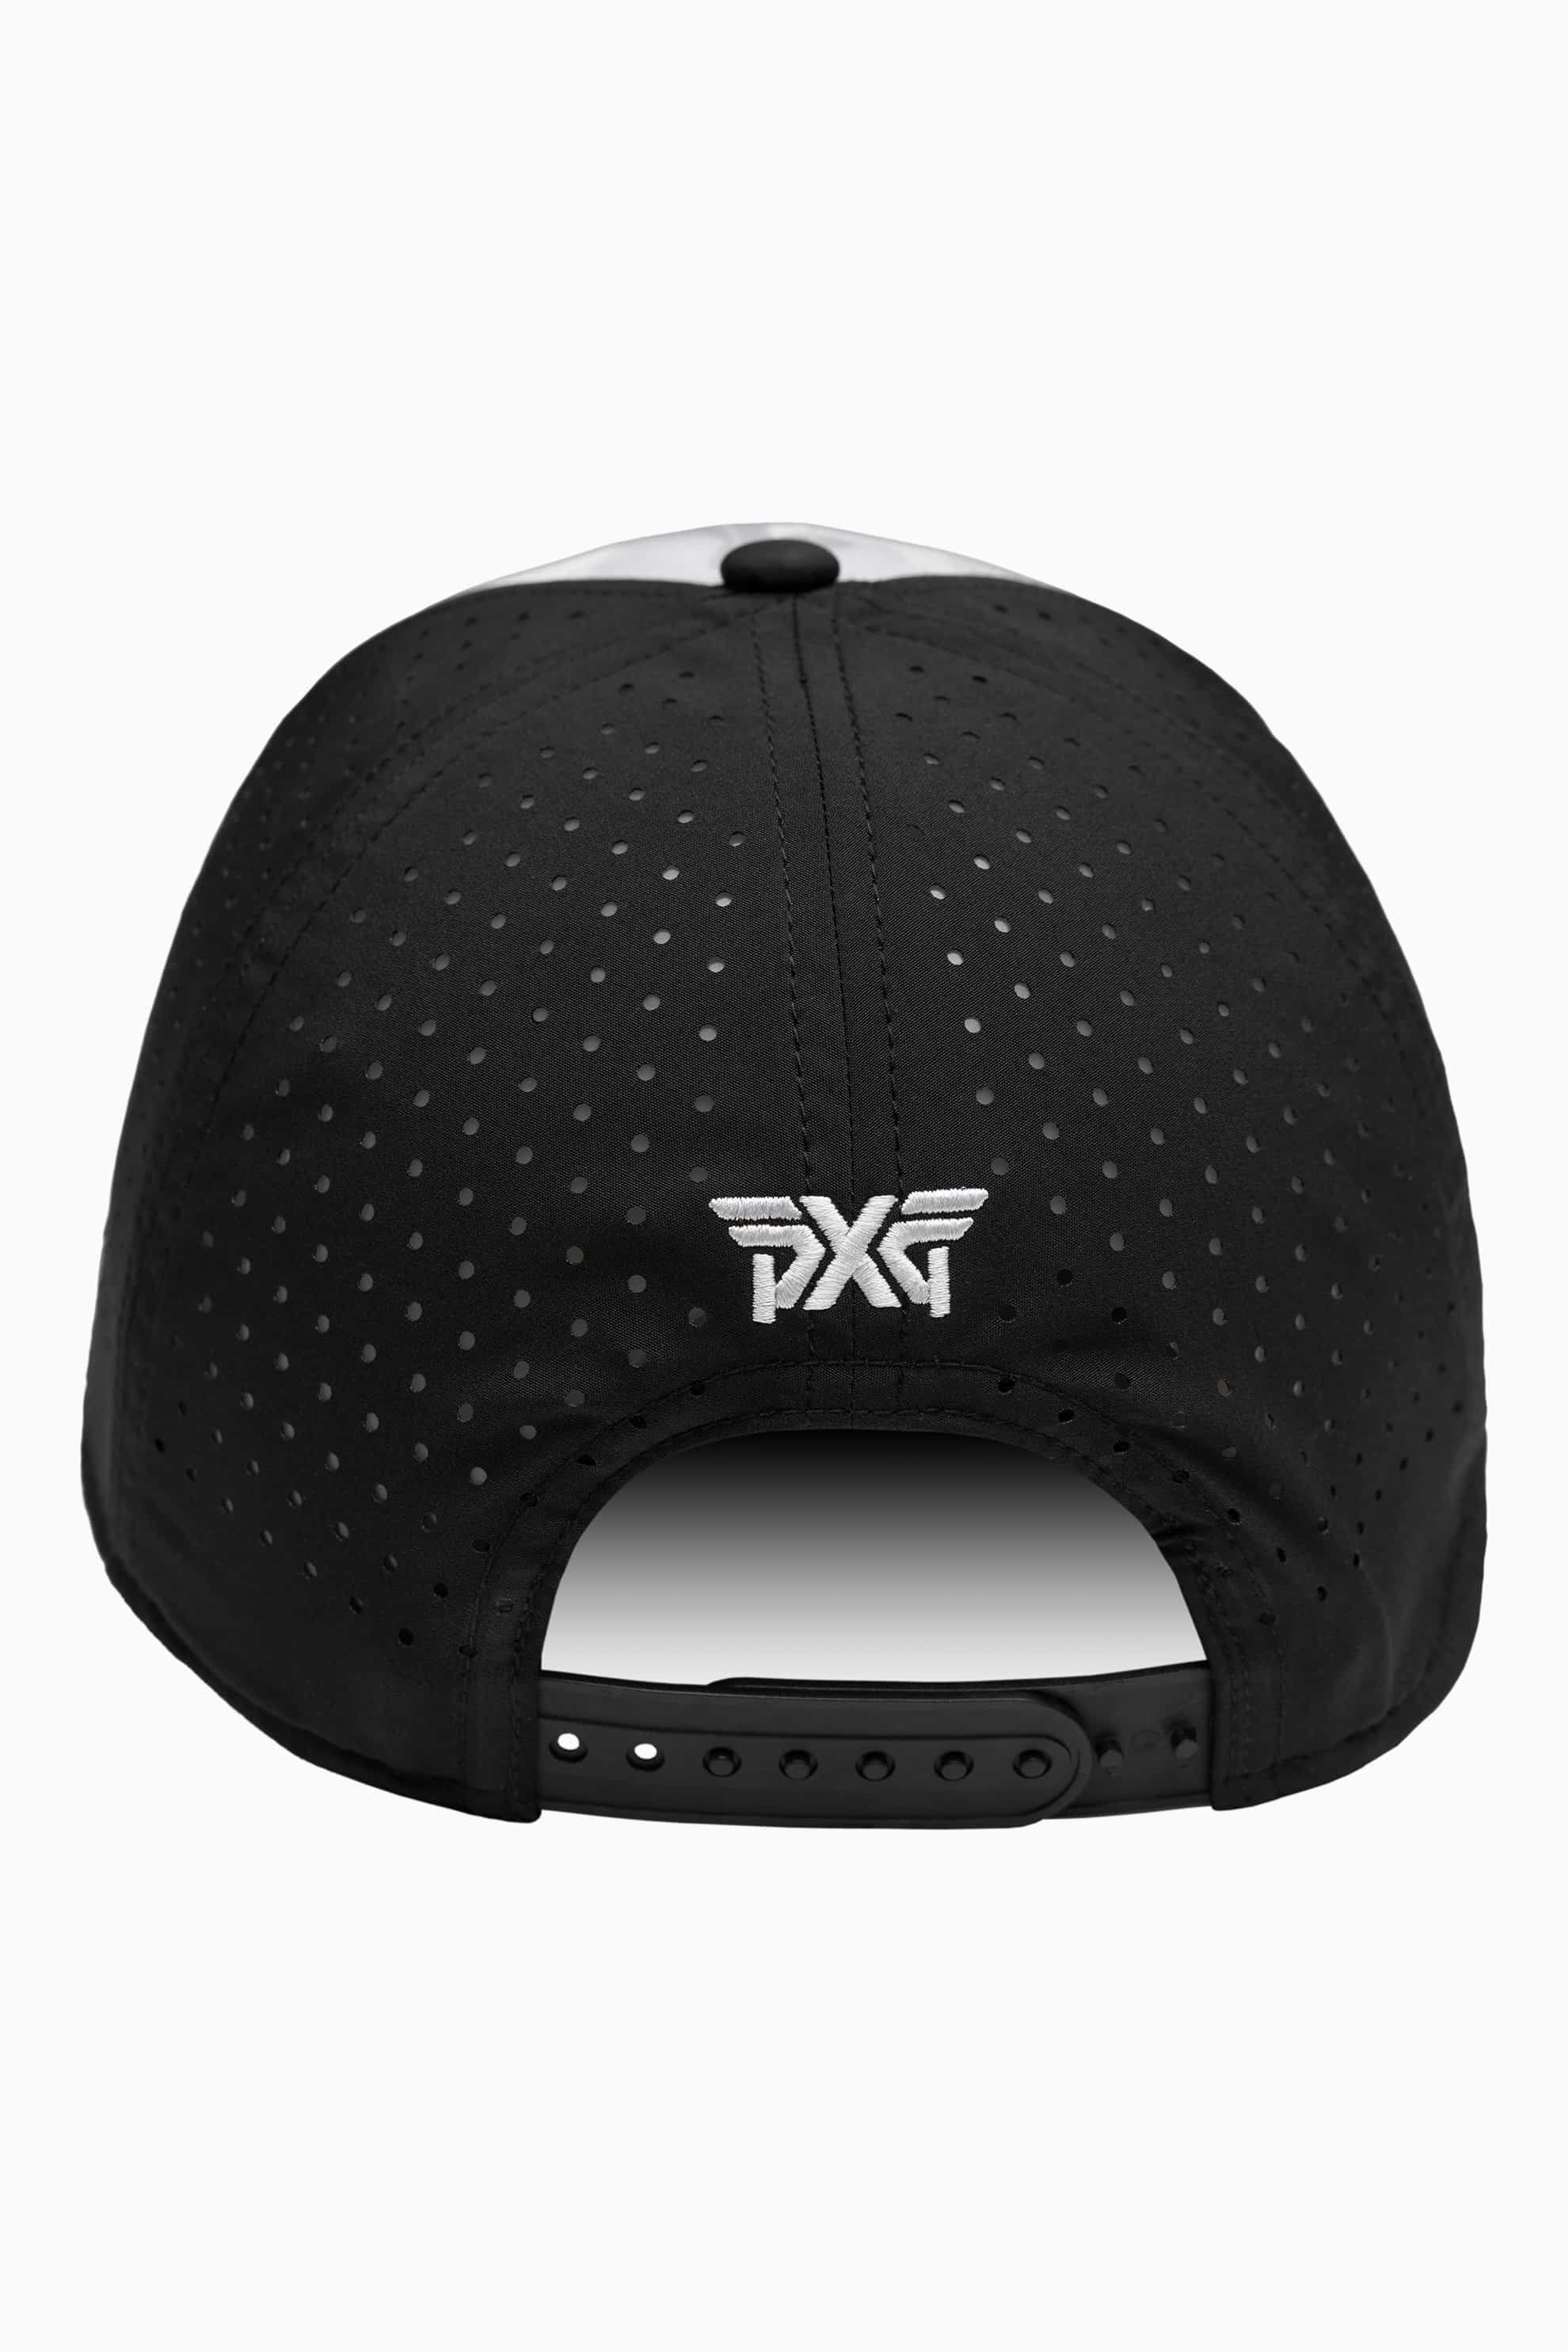 Buy Fairway Camo Faceted Large 6 Panel Structured Cap | PXG